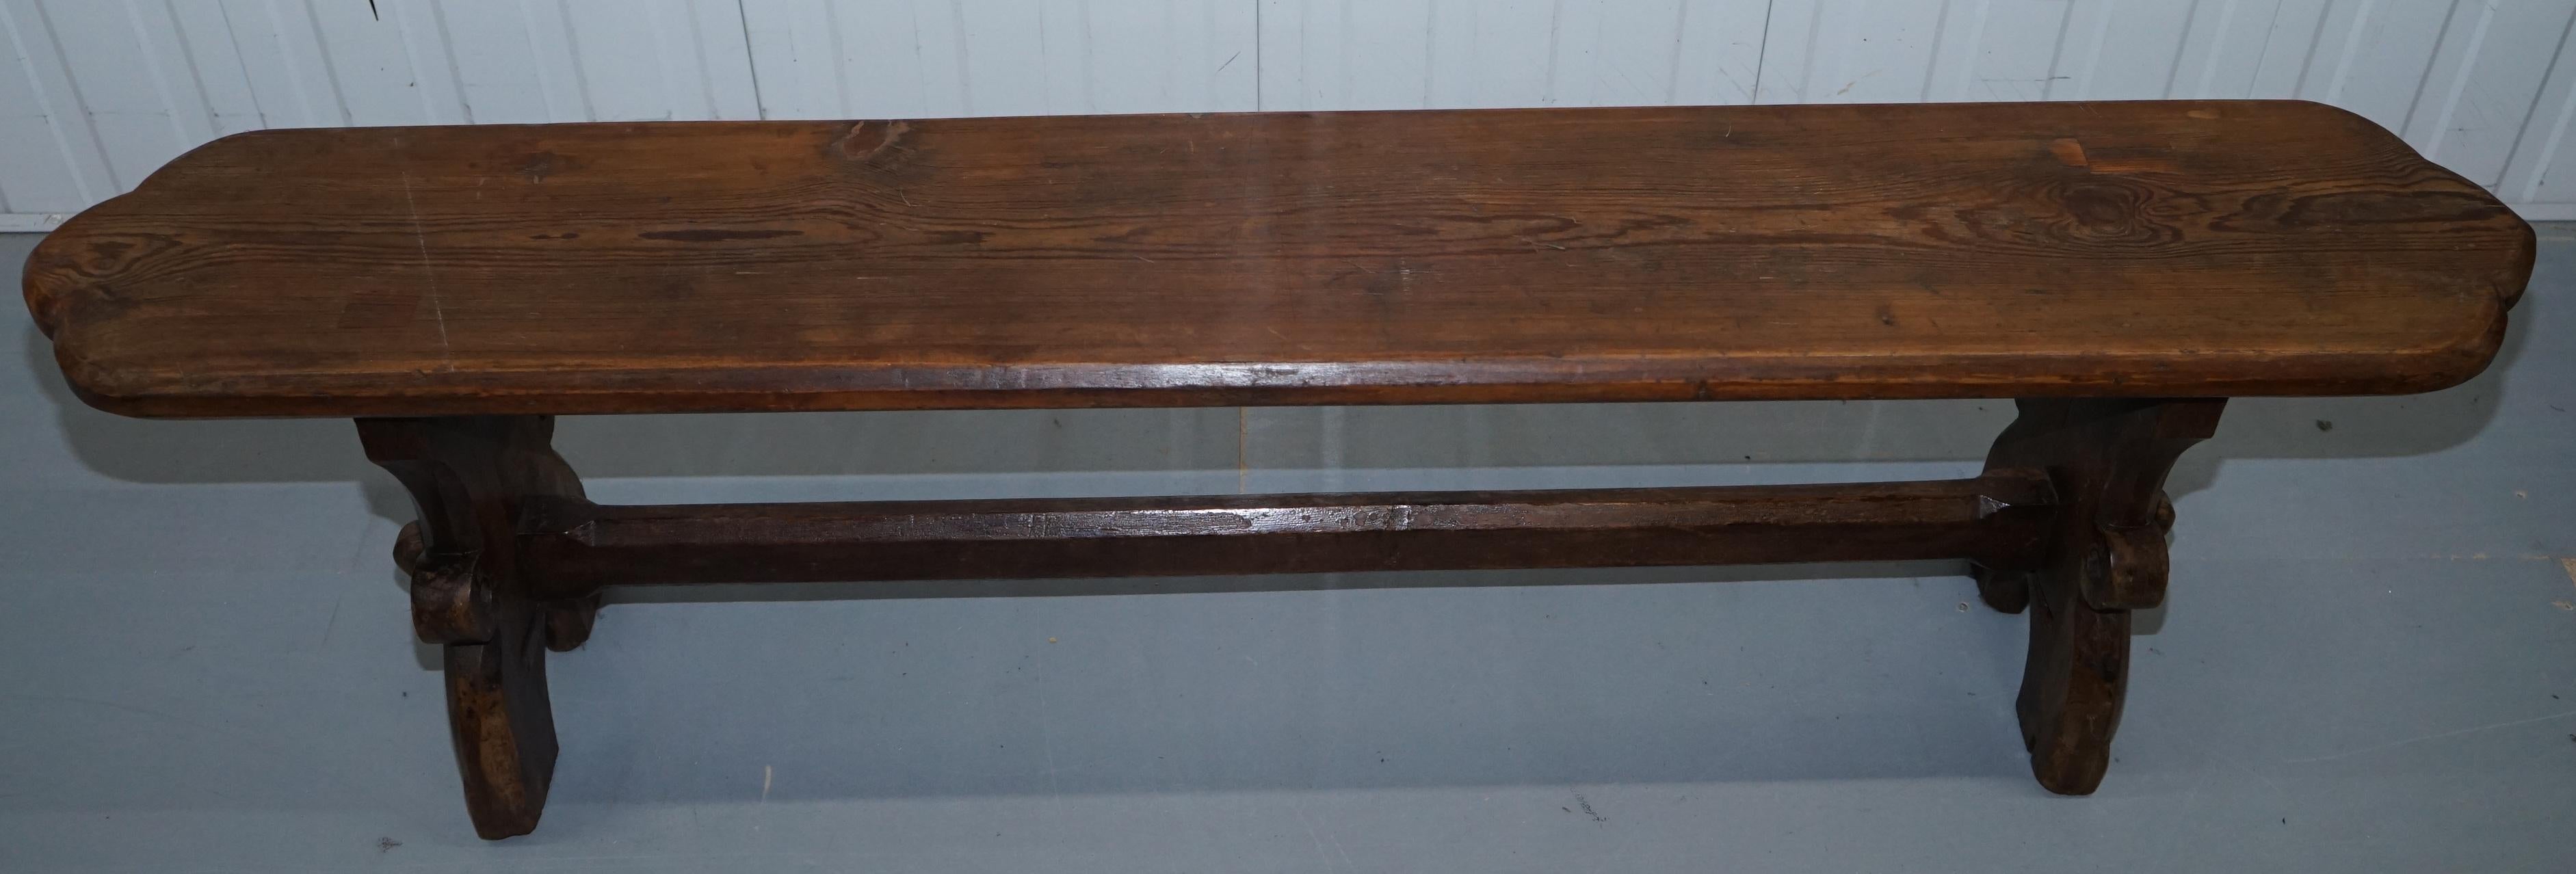 English Large 19th Century Solid Pitch Pine Bench for Dining Table Pew Pugin Original